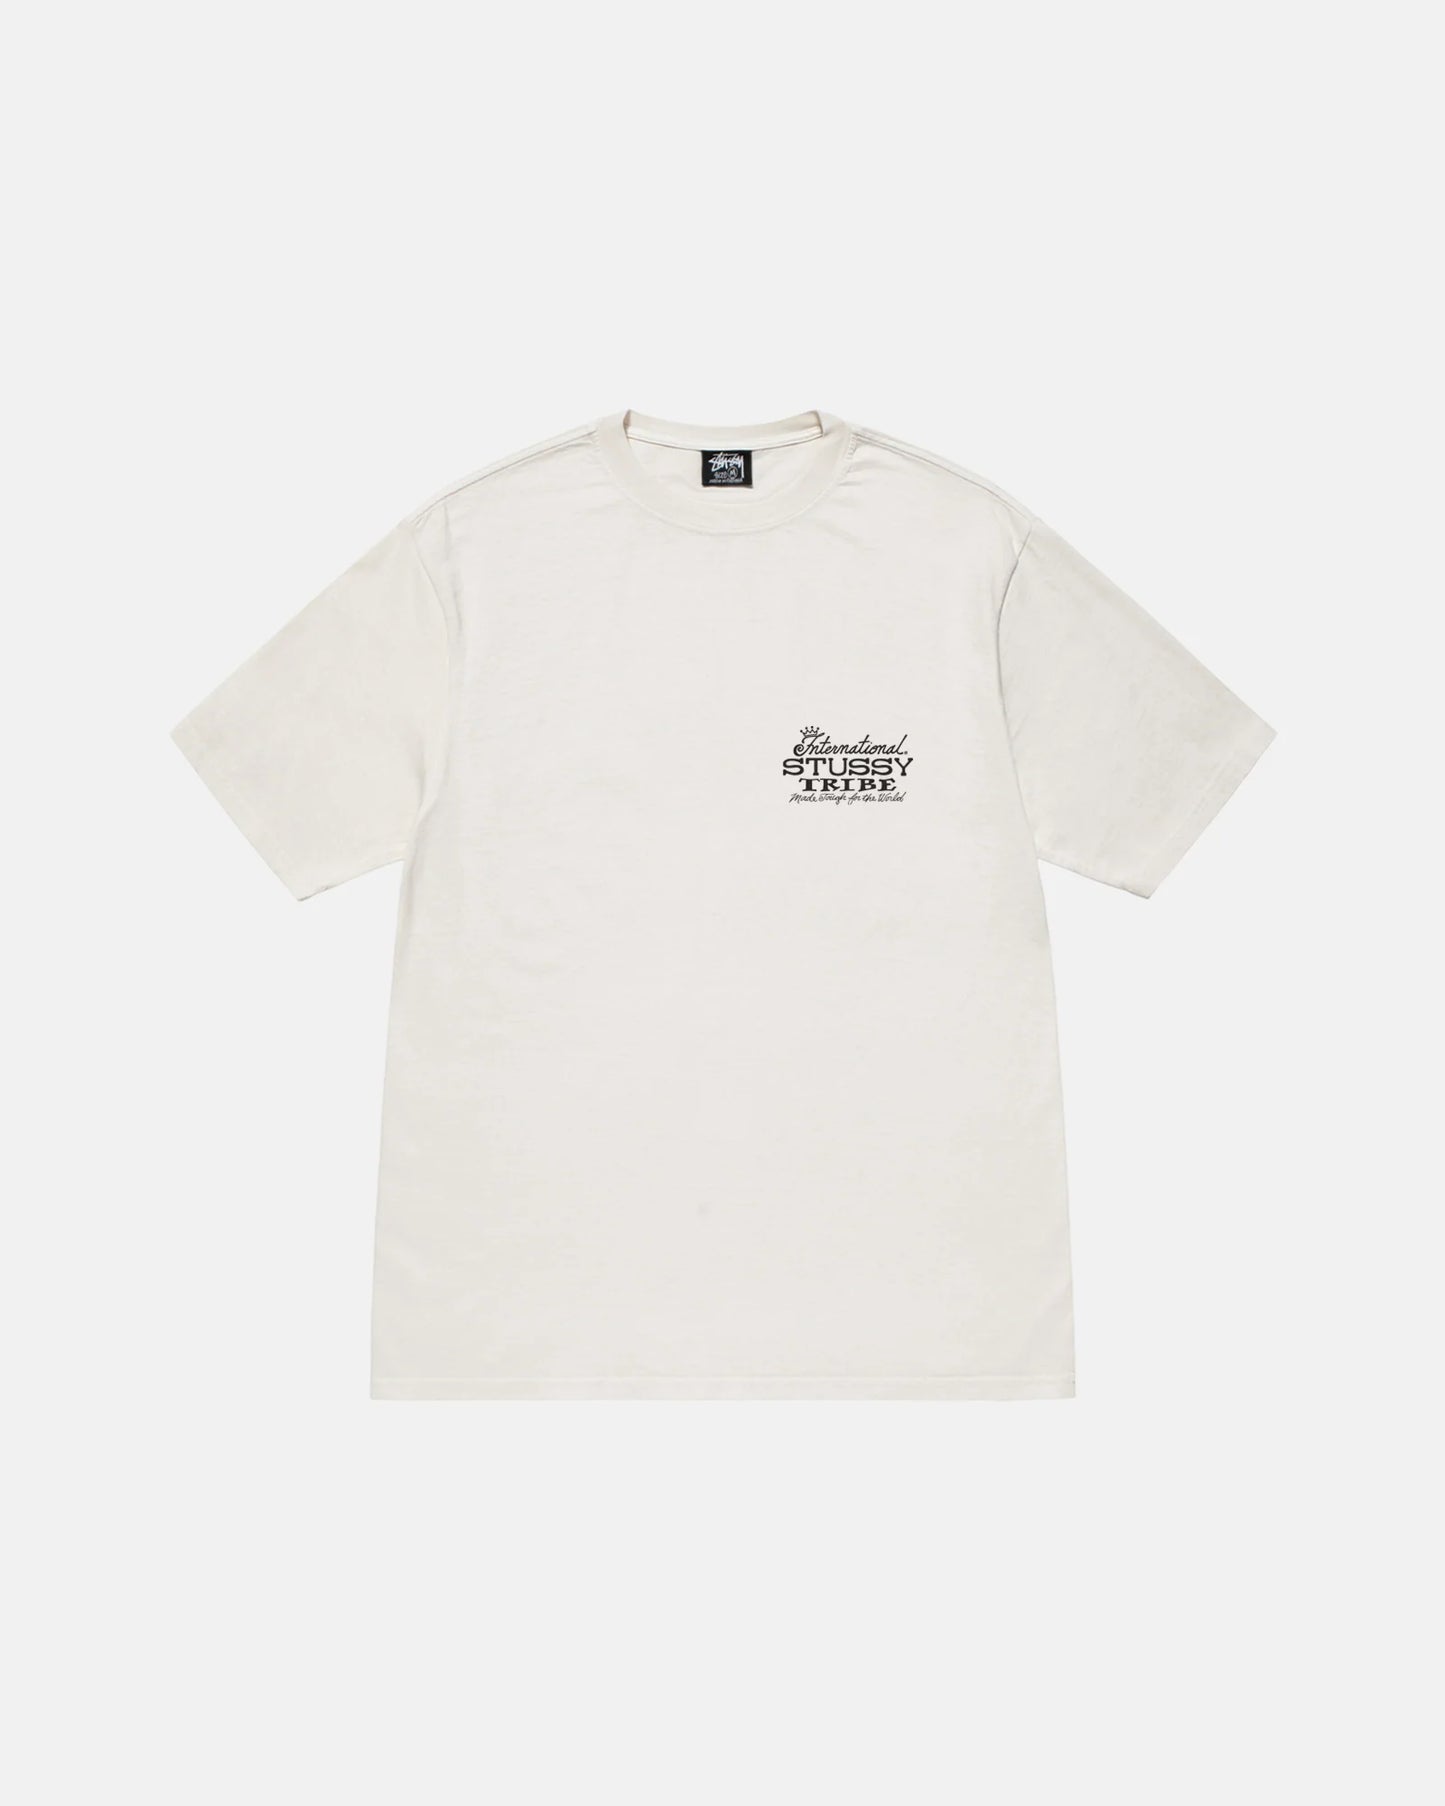 STUSSY IST TEE PIGMENT DYED